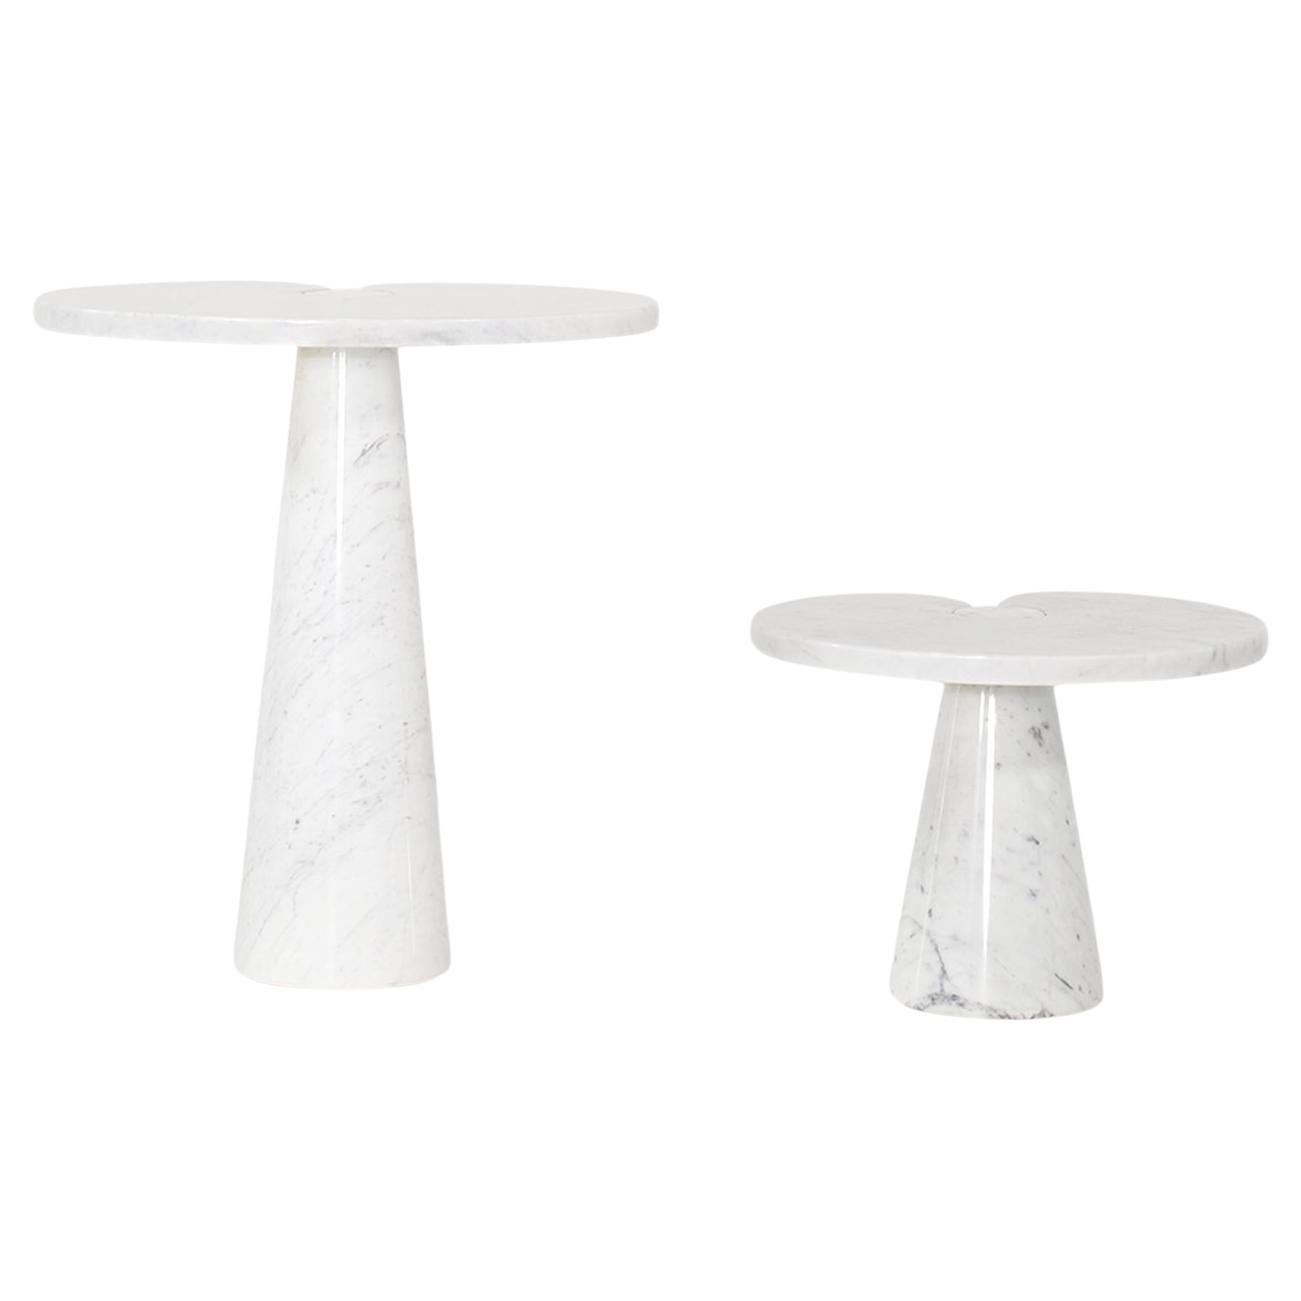 20th Century Italian Pair of Marble Side Tables - The Eros by Angelo Mangiarotti